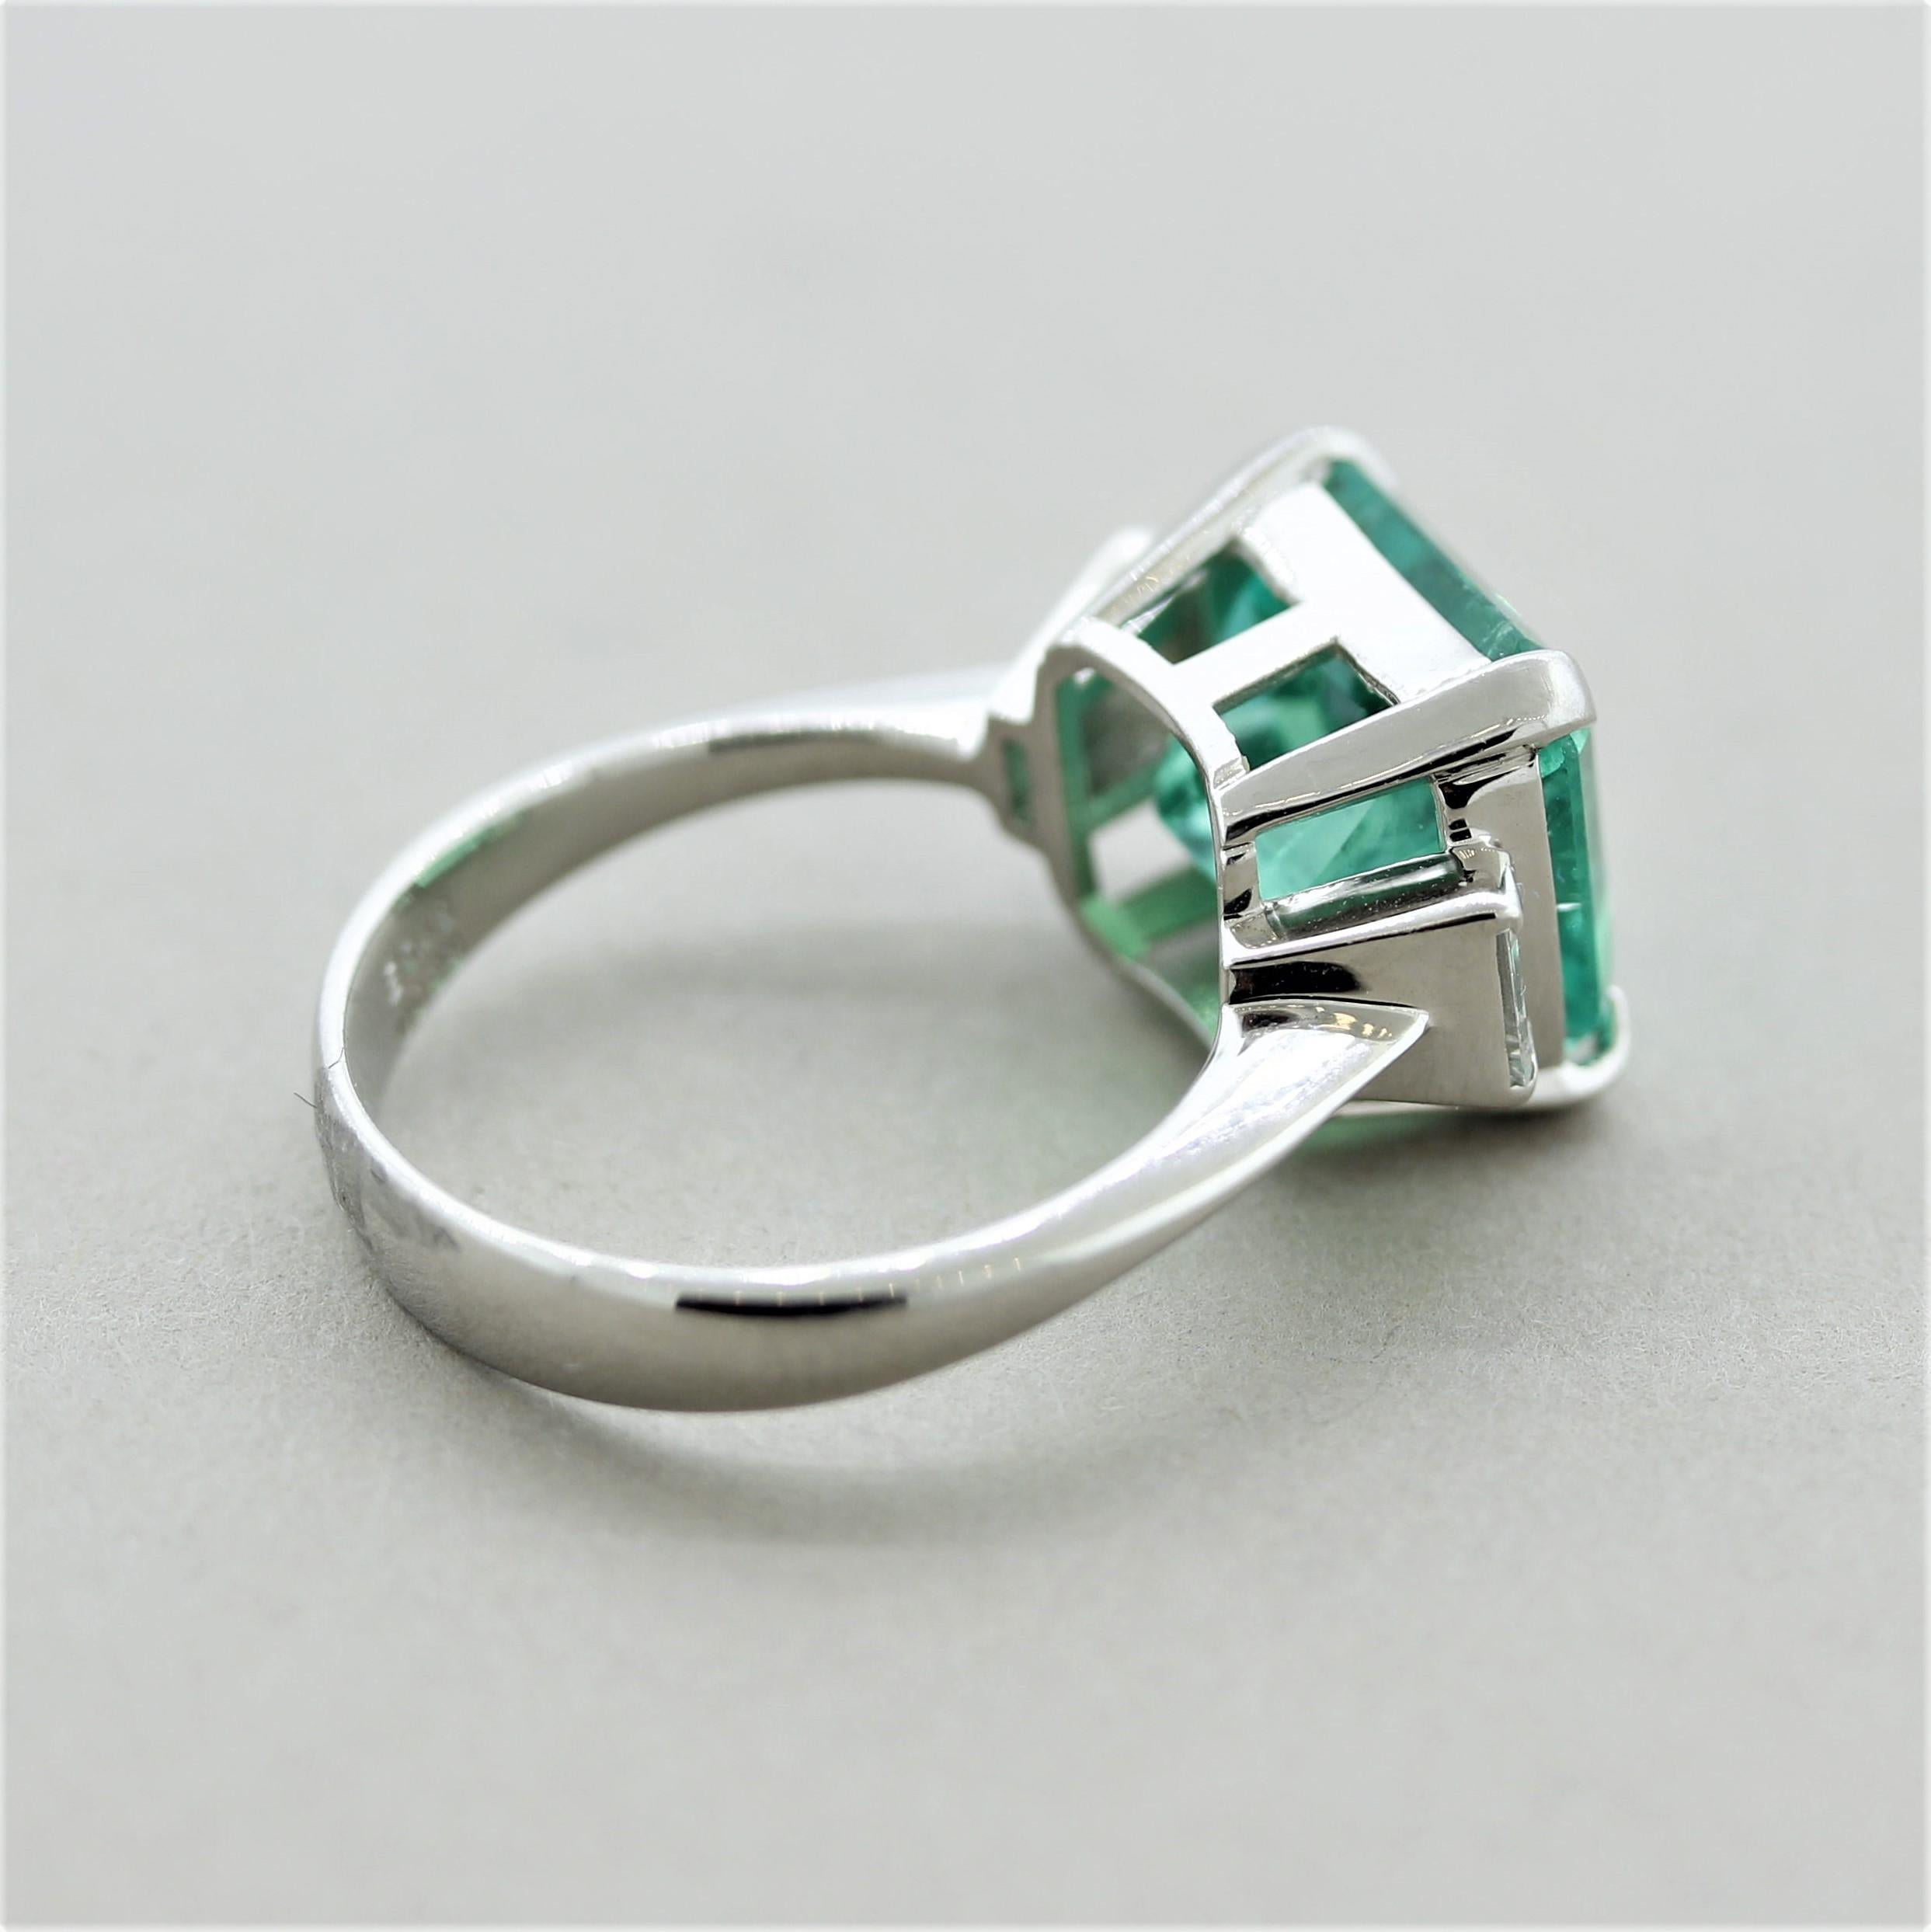 5.43 Carat Colombian Emerald Diamond Platinum Ring, GIA Certified For Sale 2